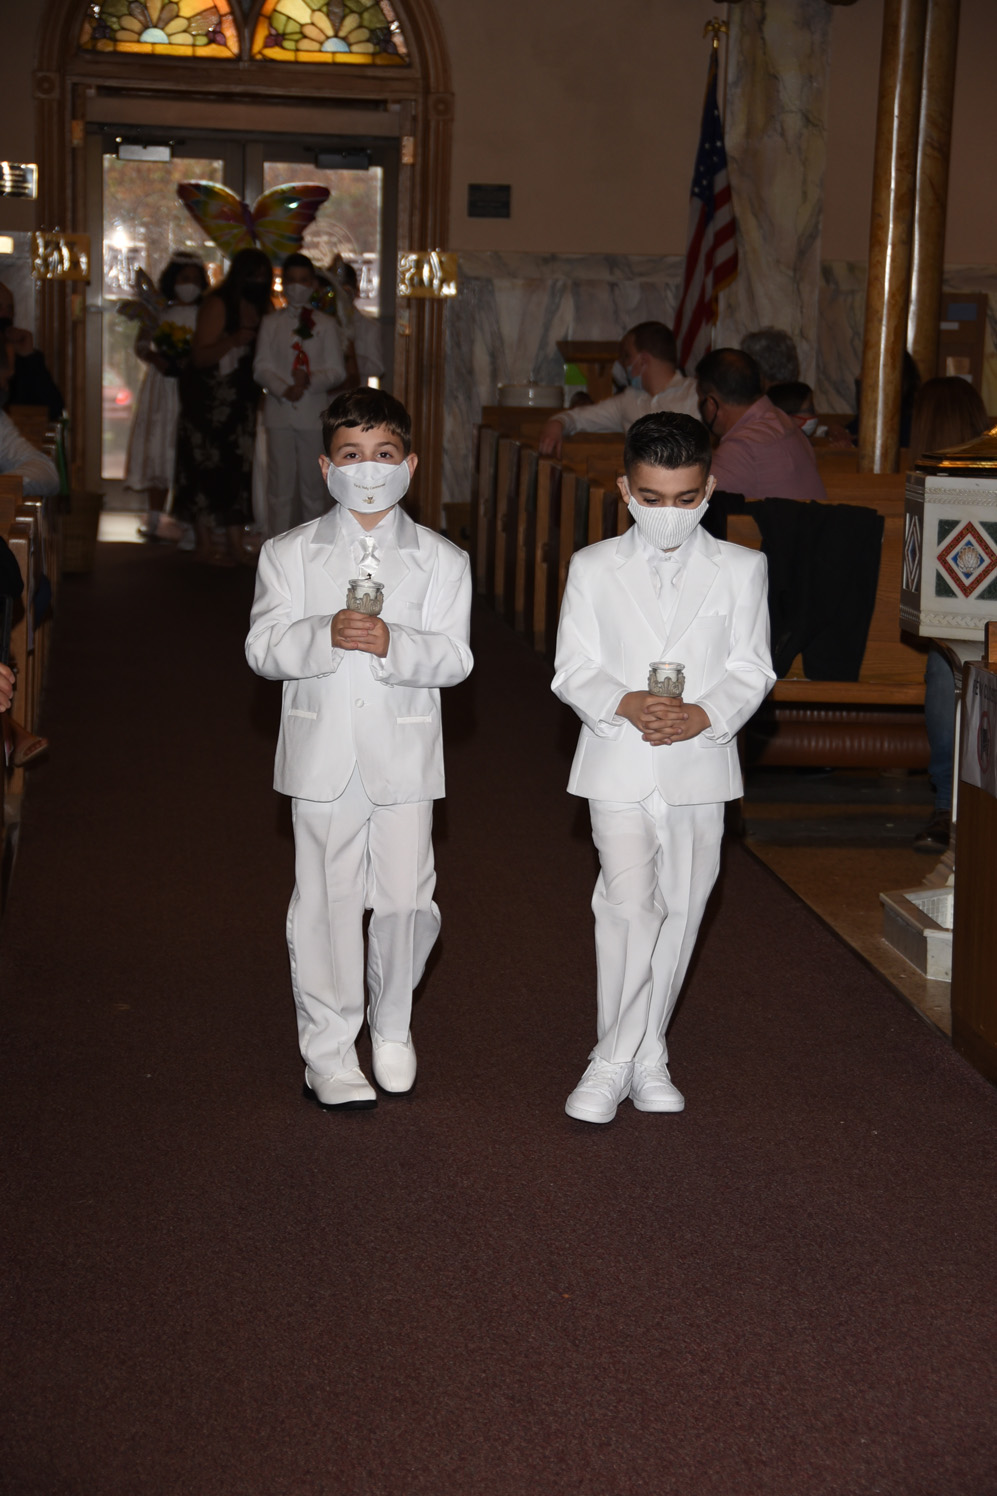 FIRST-COMMUNION-MAY-2-2021-1001001187